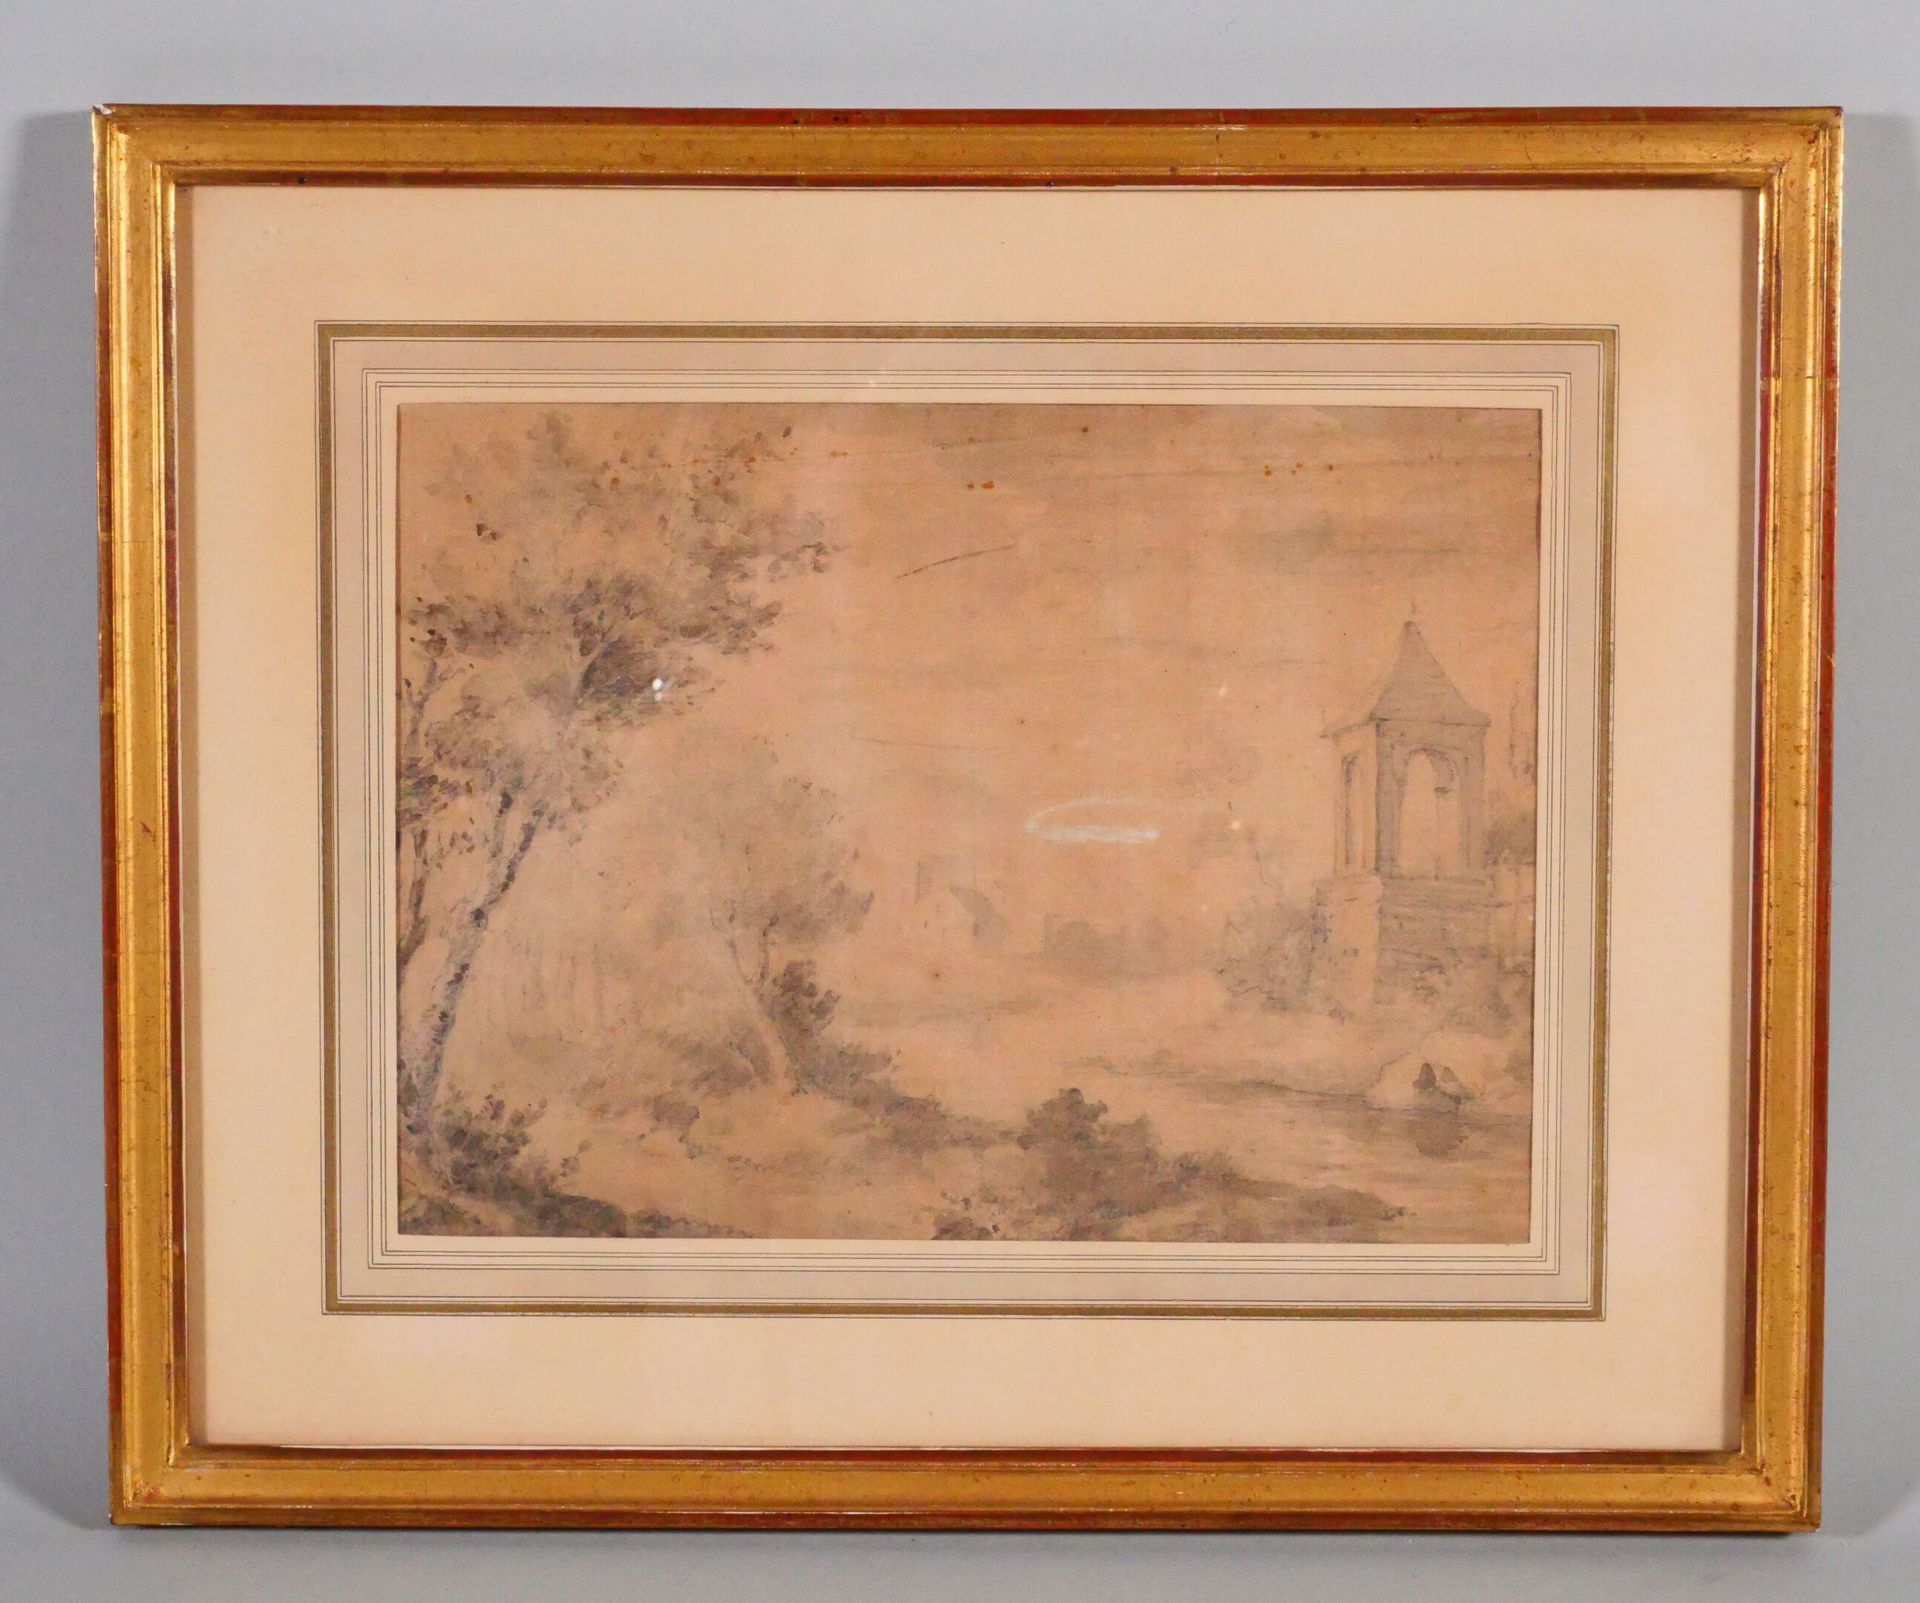 Null French school circa 1800
Landscape
Brown wash over black pencil lines 
Sigh&hellip;